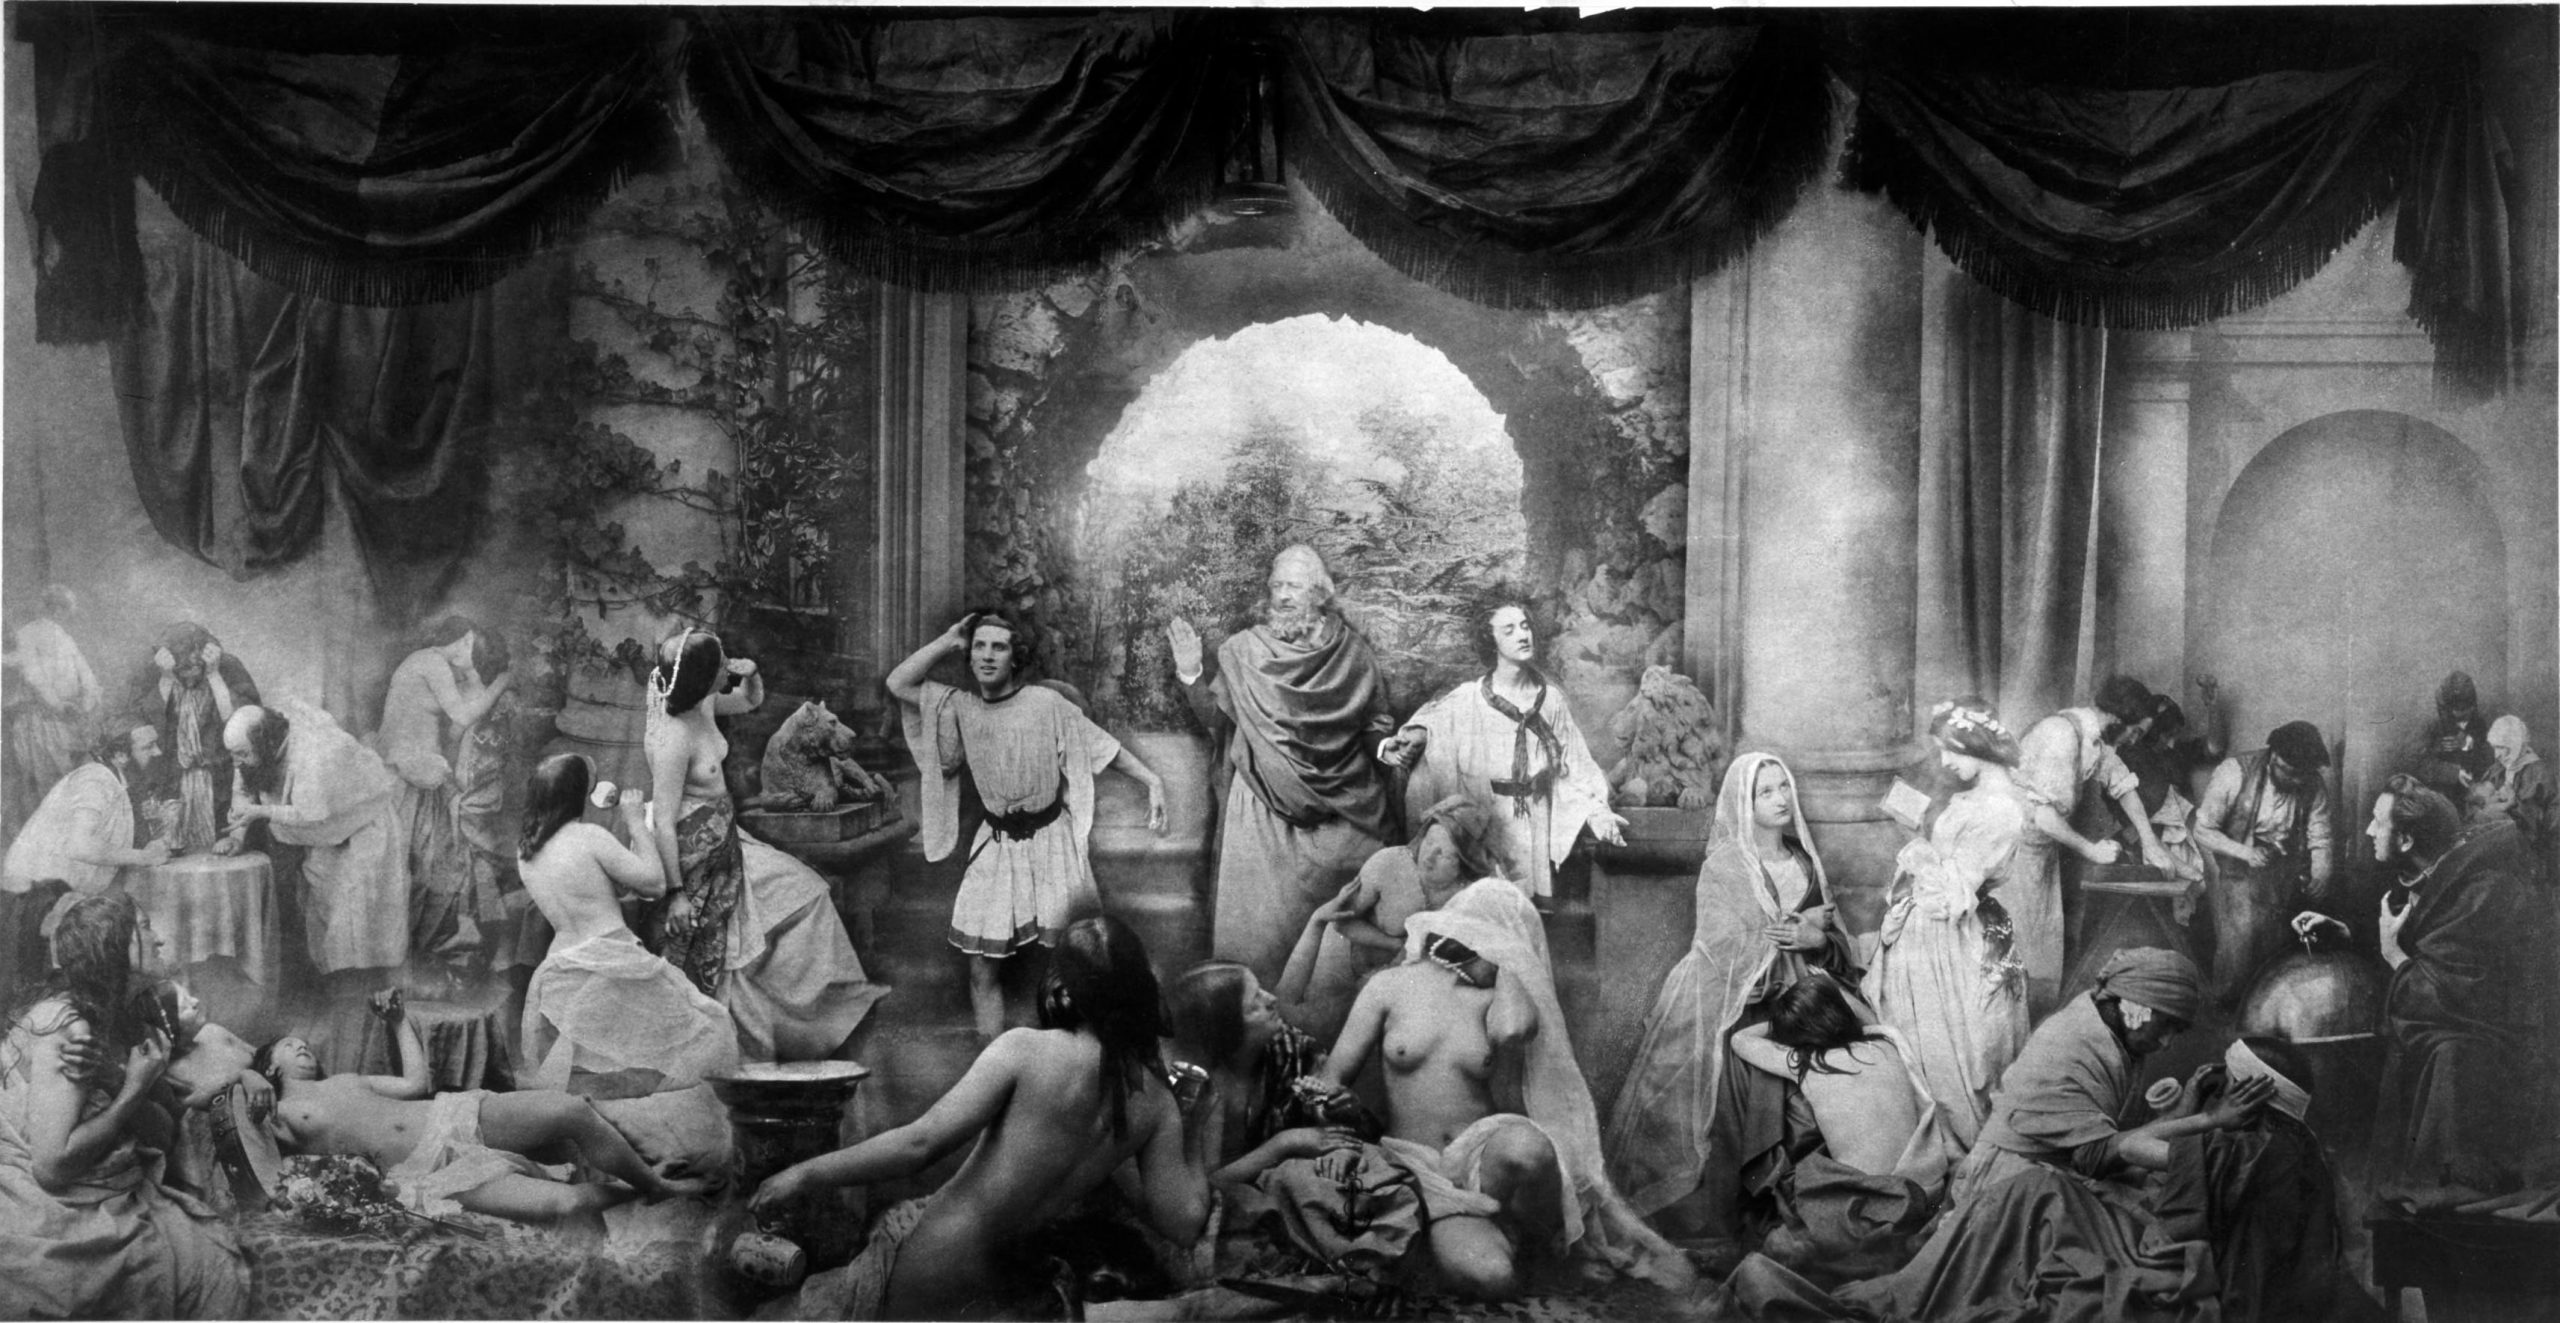 A long rectangular black and white photograph of small groups of people engaged in different activities from gambling to sewing. People are wearing classical drapery or are partially nude. Three men stand in the center in front of an arch. The central person raises his right hand. The two men on either side look and lean in opposite directions away from him.